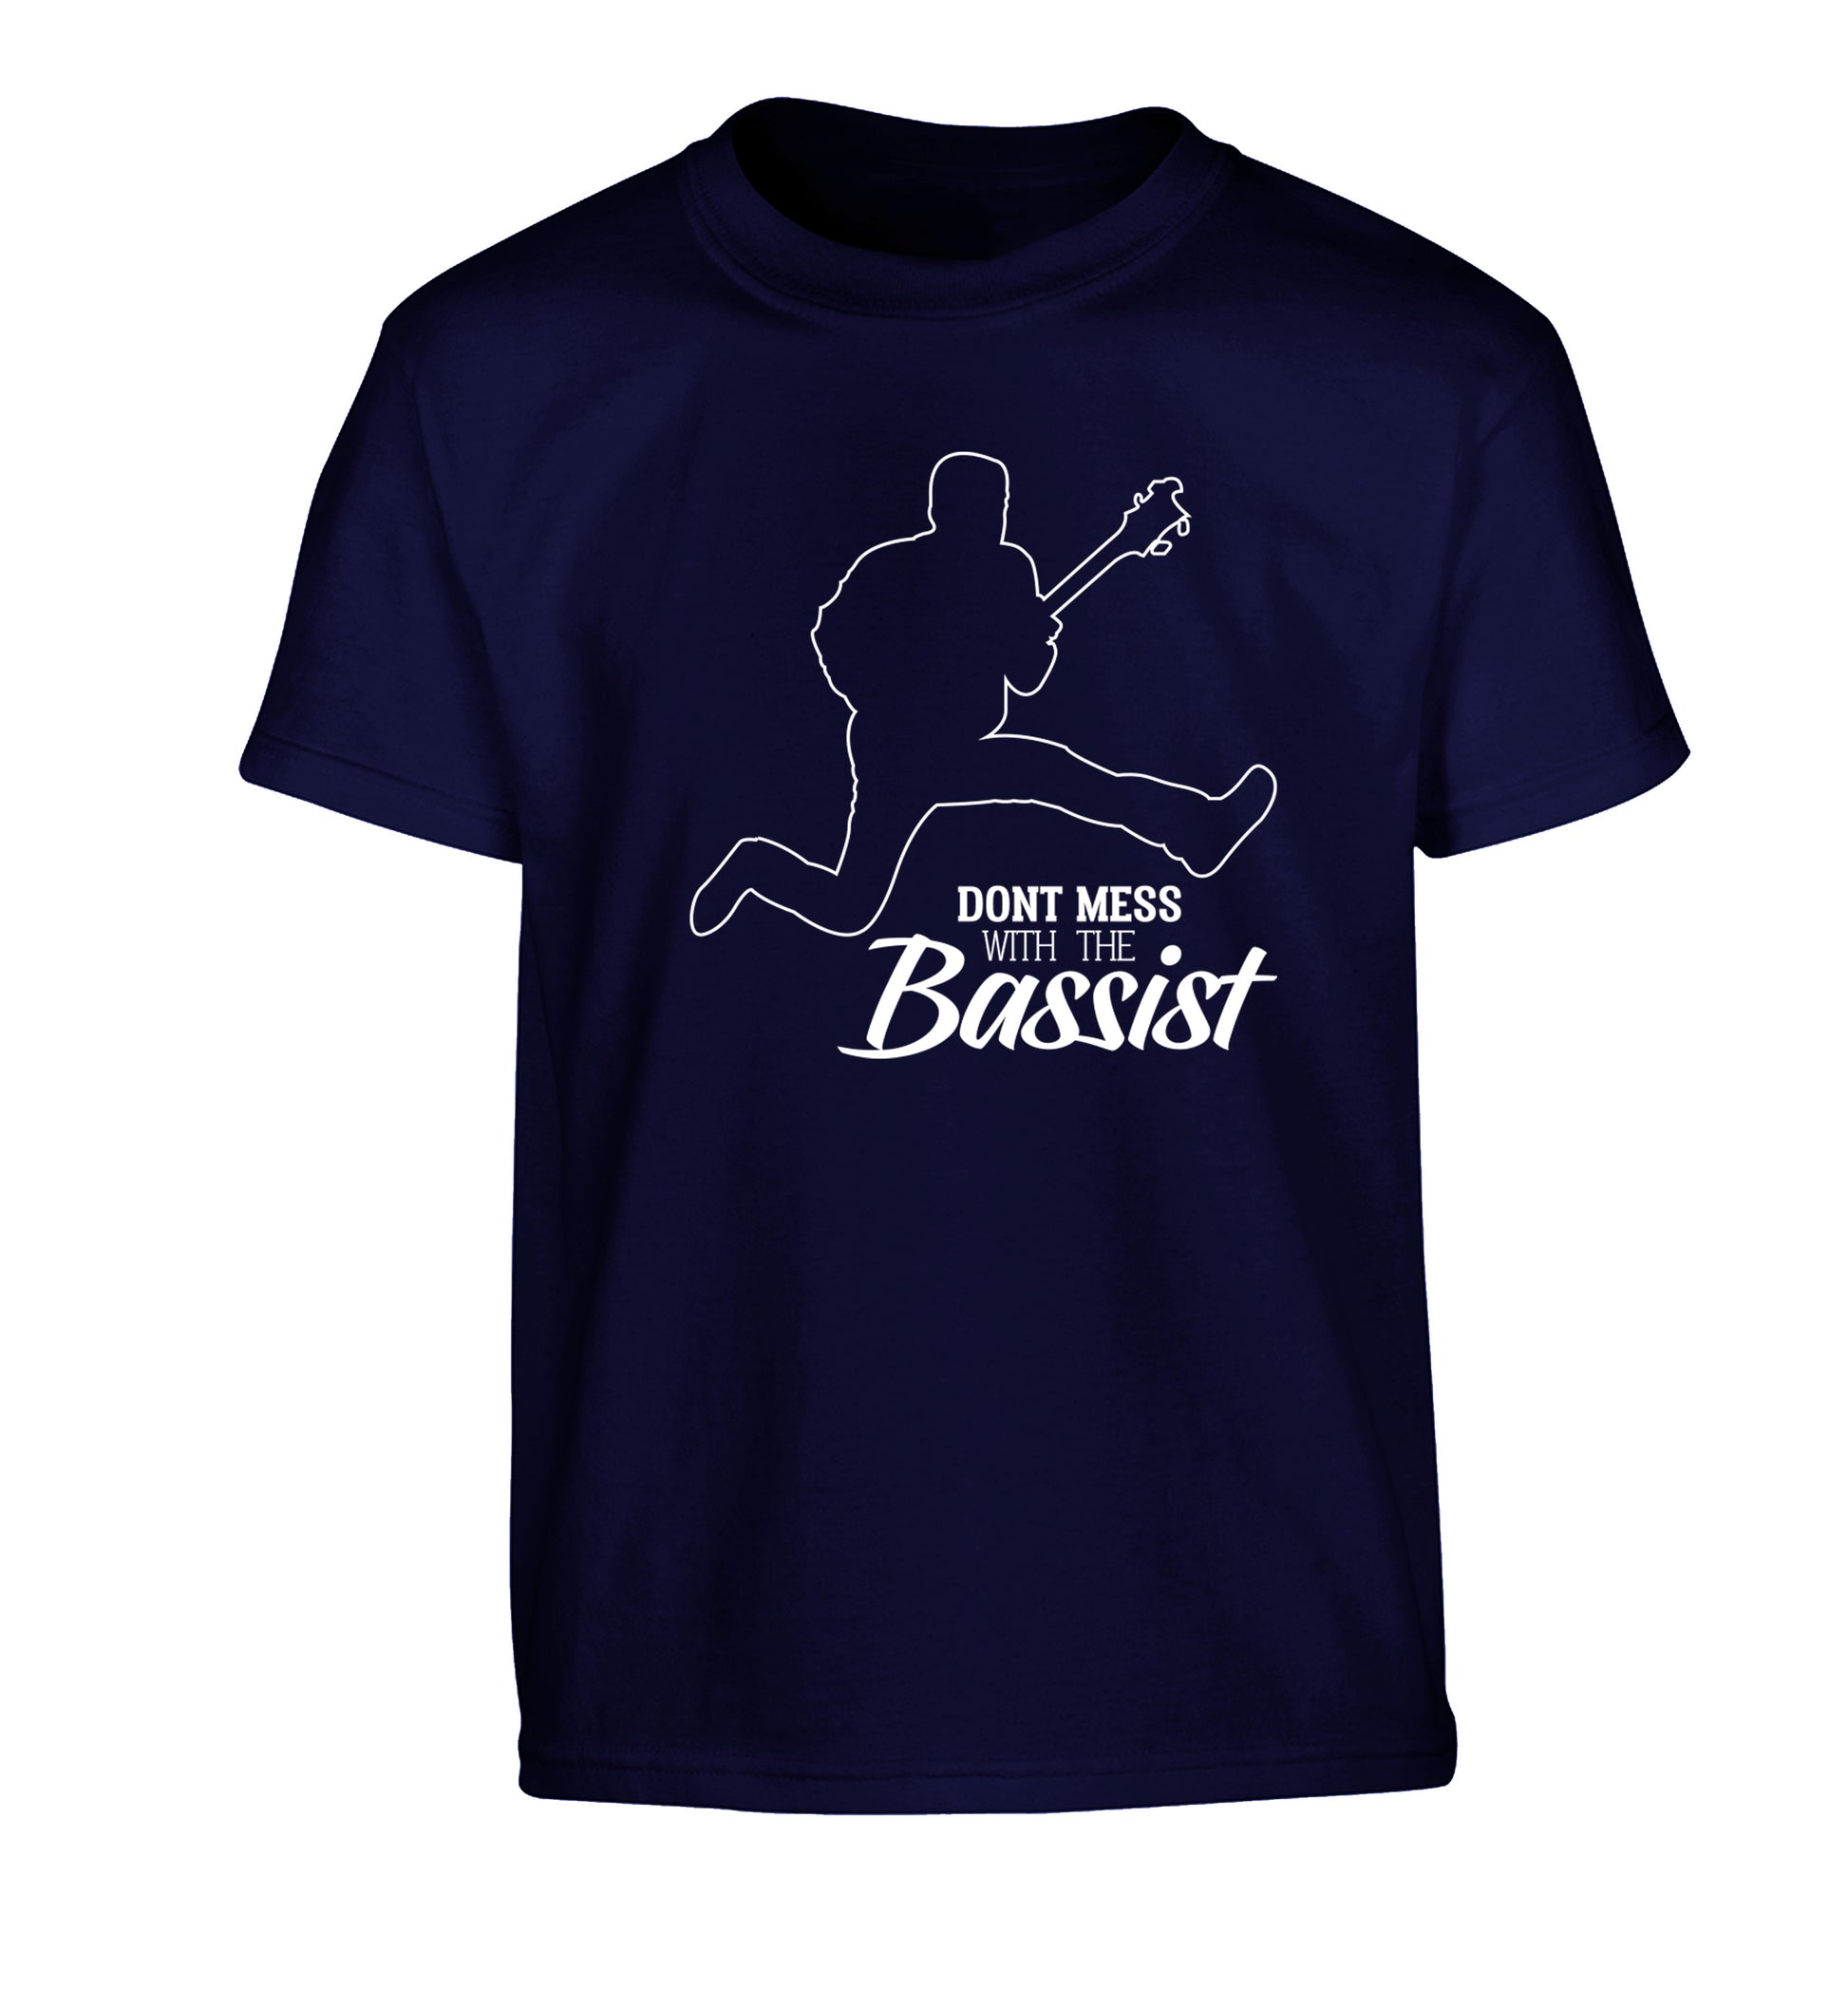 Dont mess with the bassist Children's navy Tshirt 12-13 Years